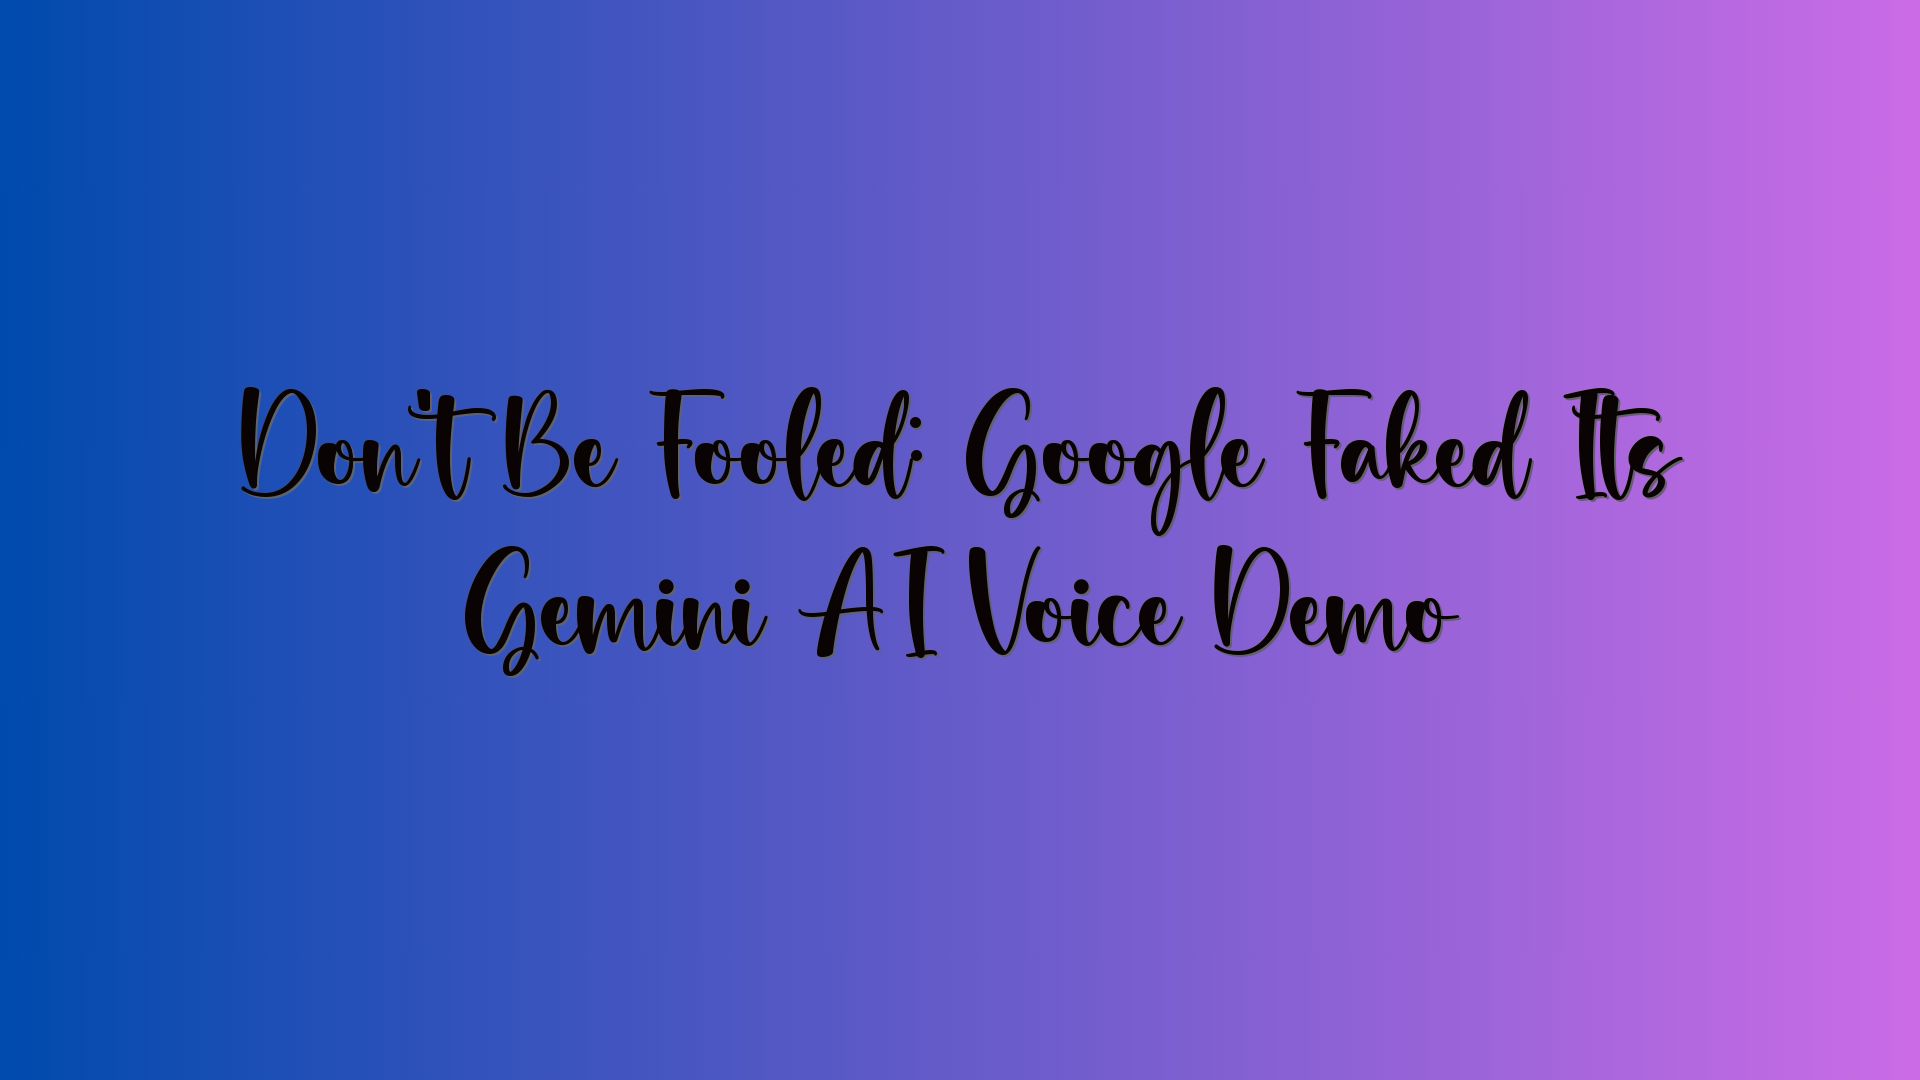 Don’t Be Fooled: Google Faked Its Gemini AI Voice Demo